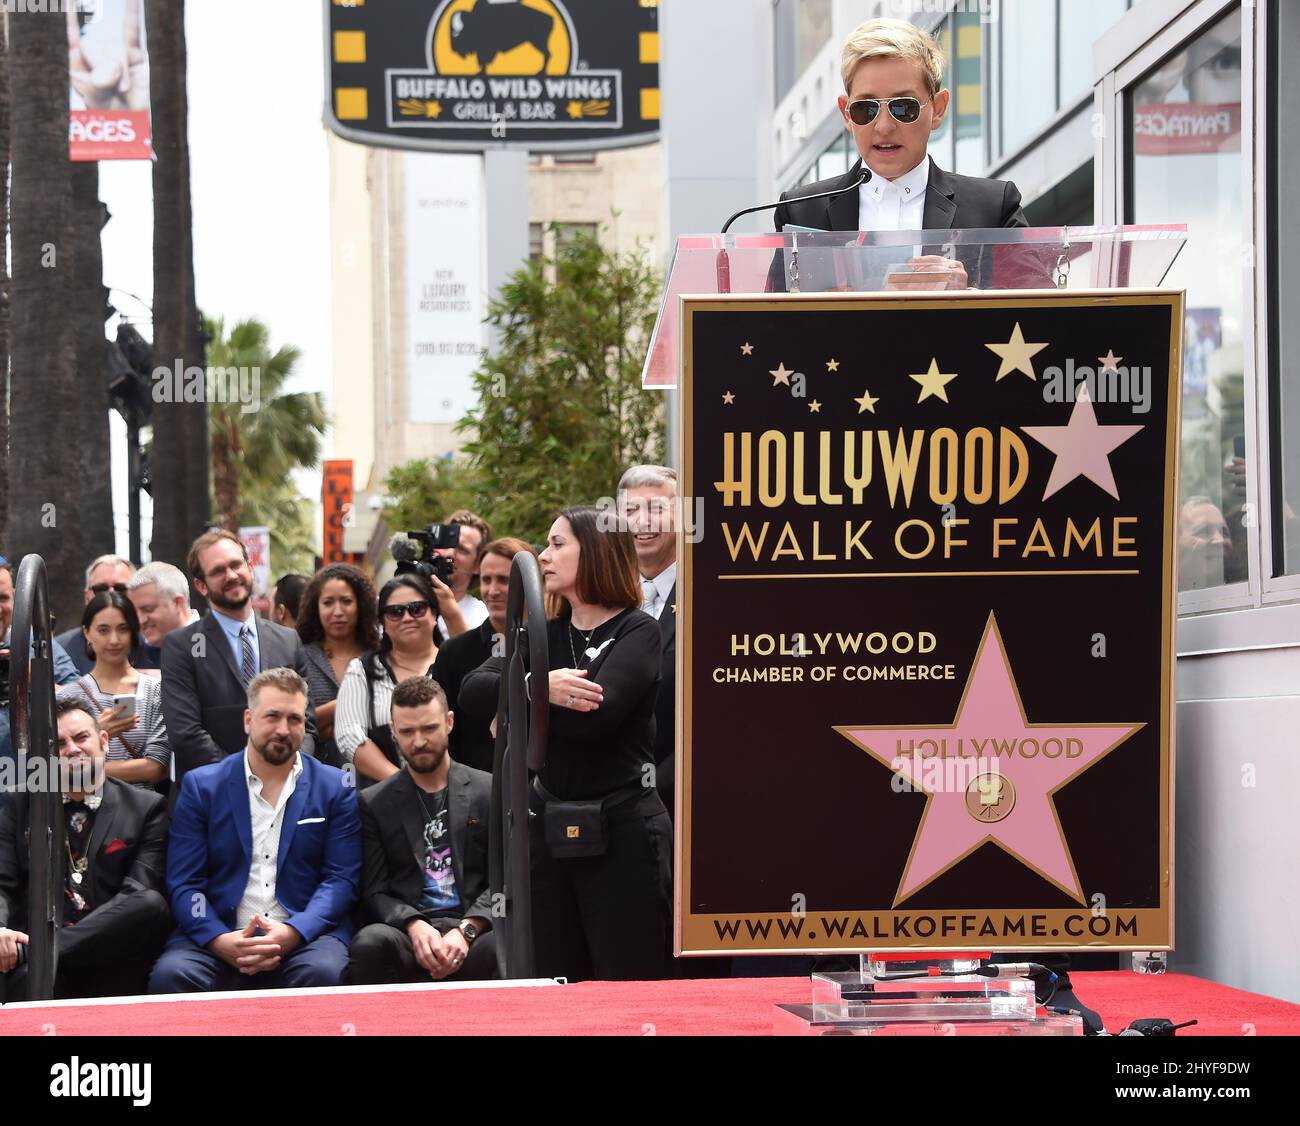 Ellen Degeneres attends the NSYNC walk of fame ceremony held on Hollywood Blvd near LaBrea on April 30, 2018 in Hollywood, CA Stock Photo